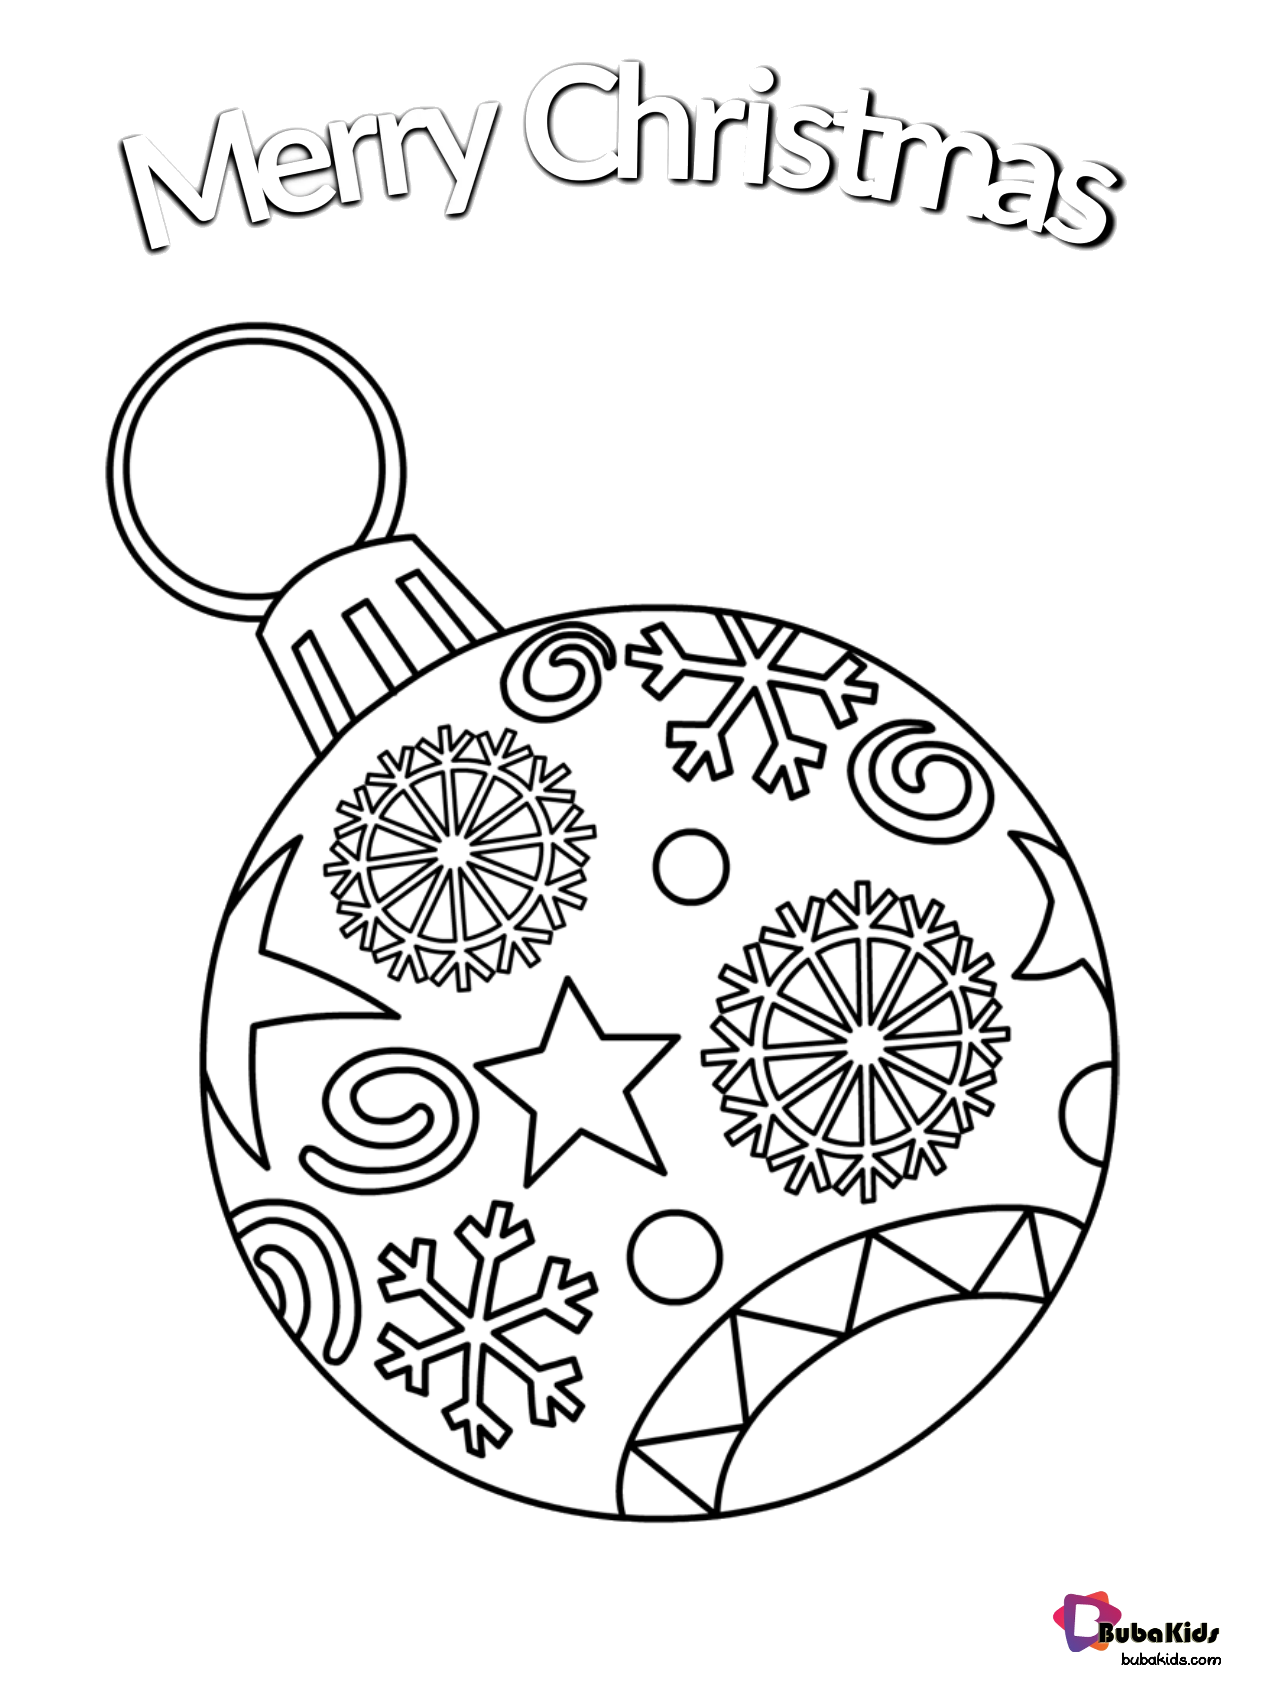 Christmas Tree Ornament coloring page. Wallpaper